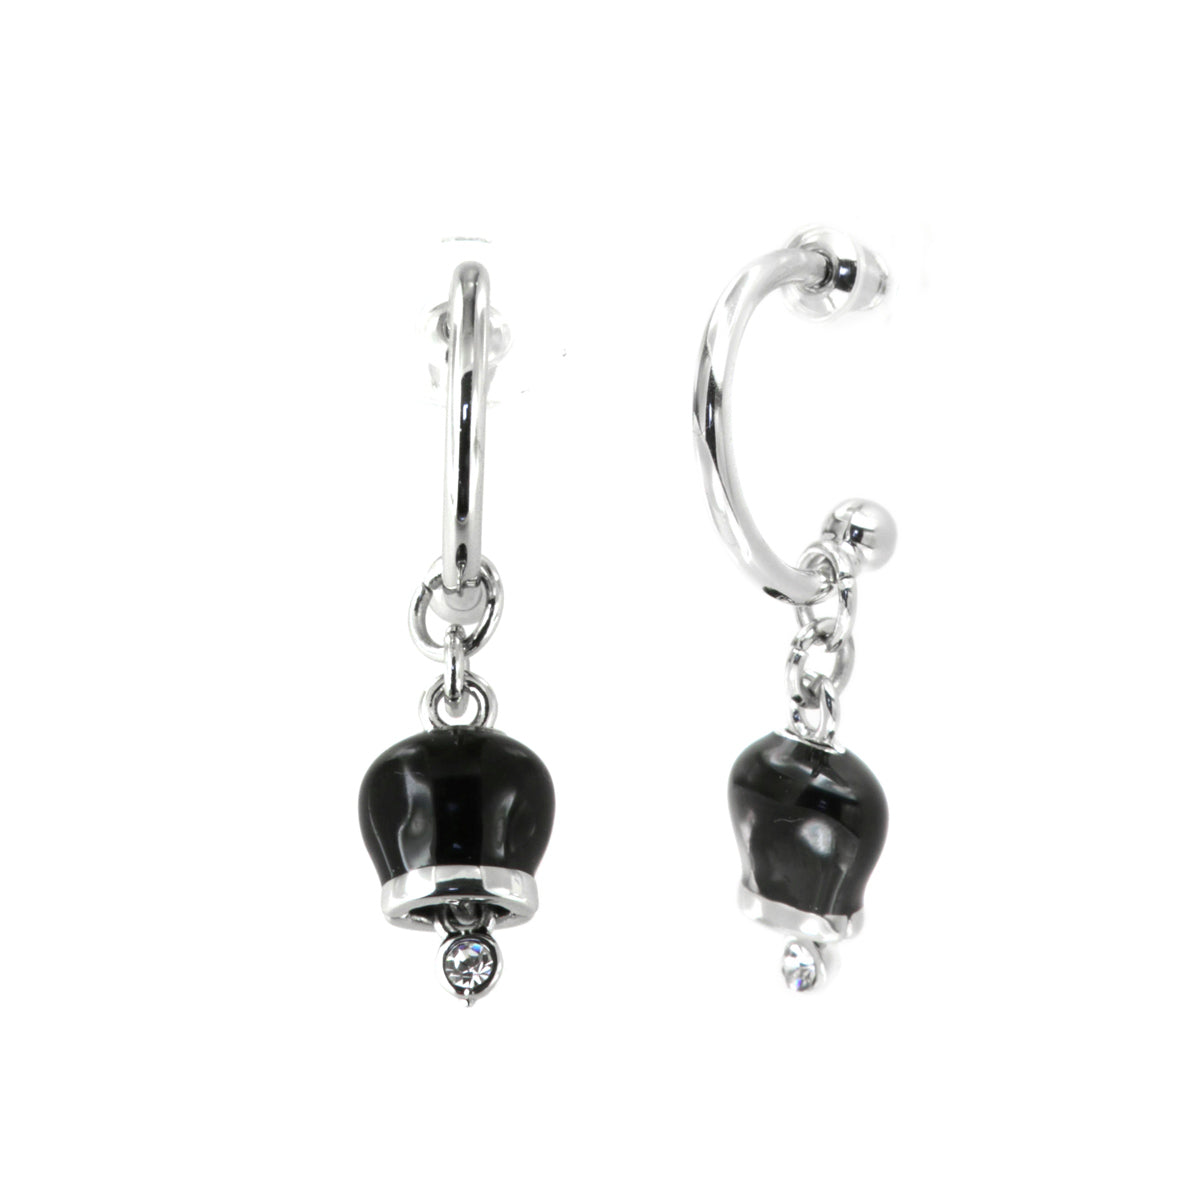 Metal earrings with a circle, with a pendant charm bell, embellished with black enamel and crystals